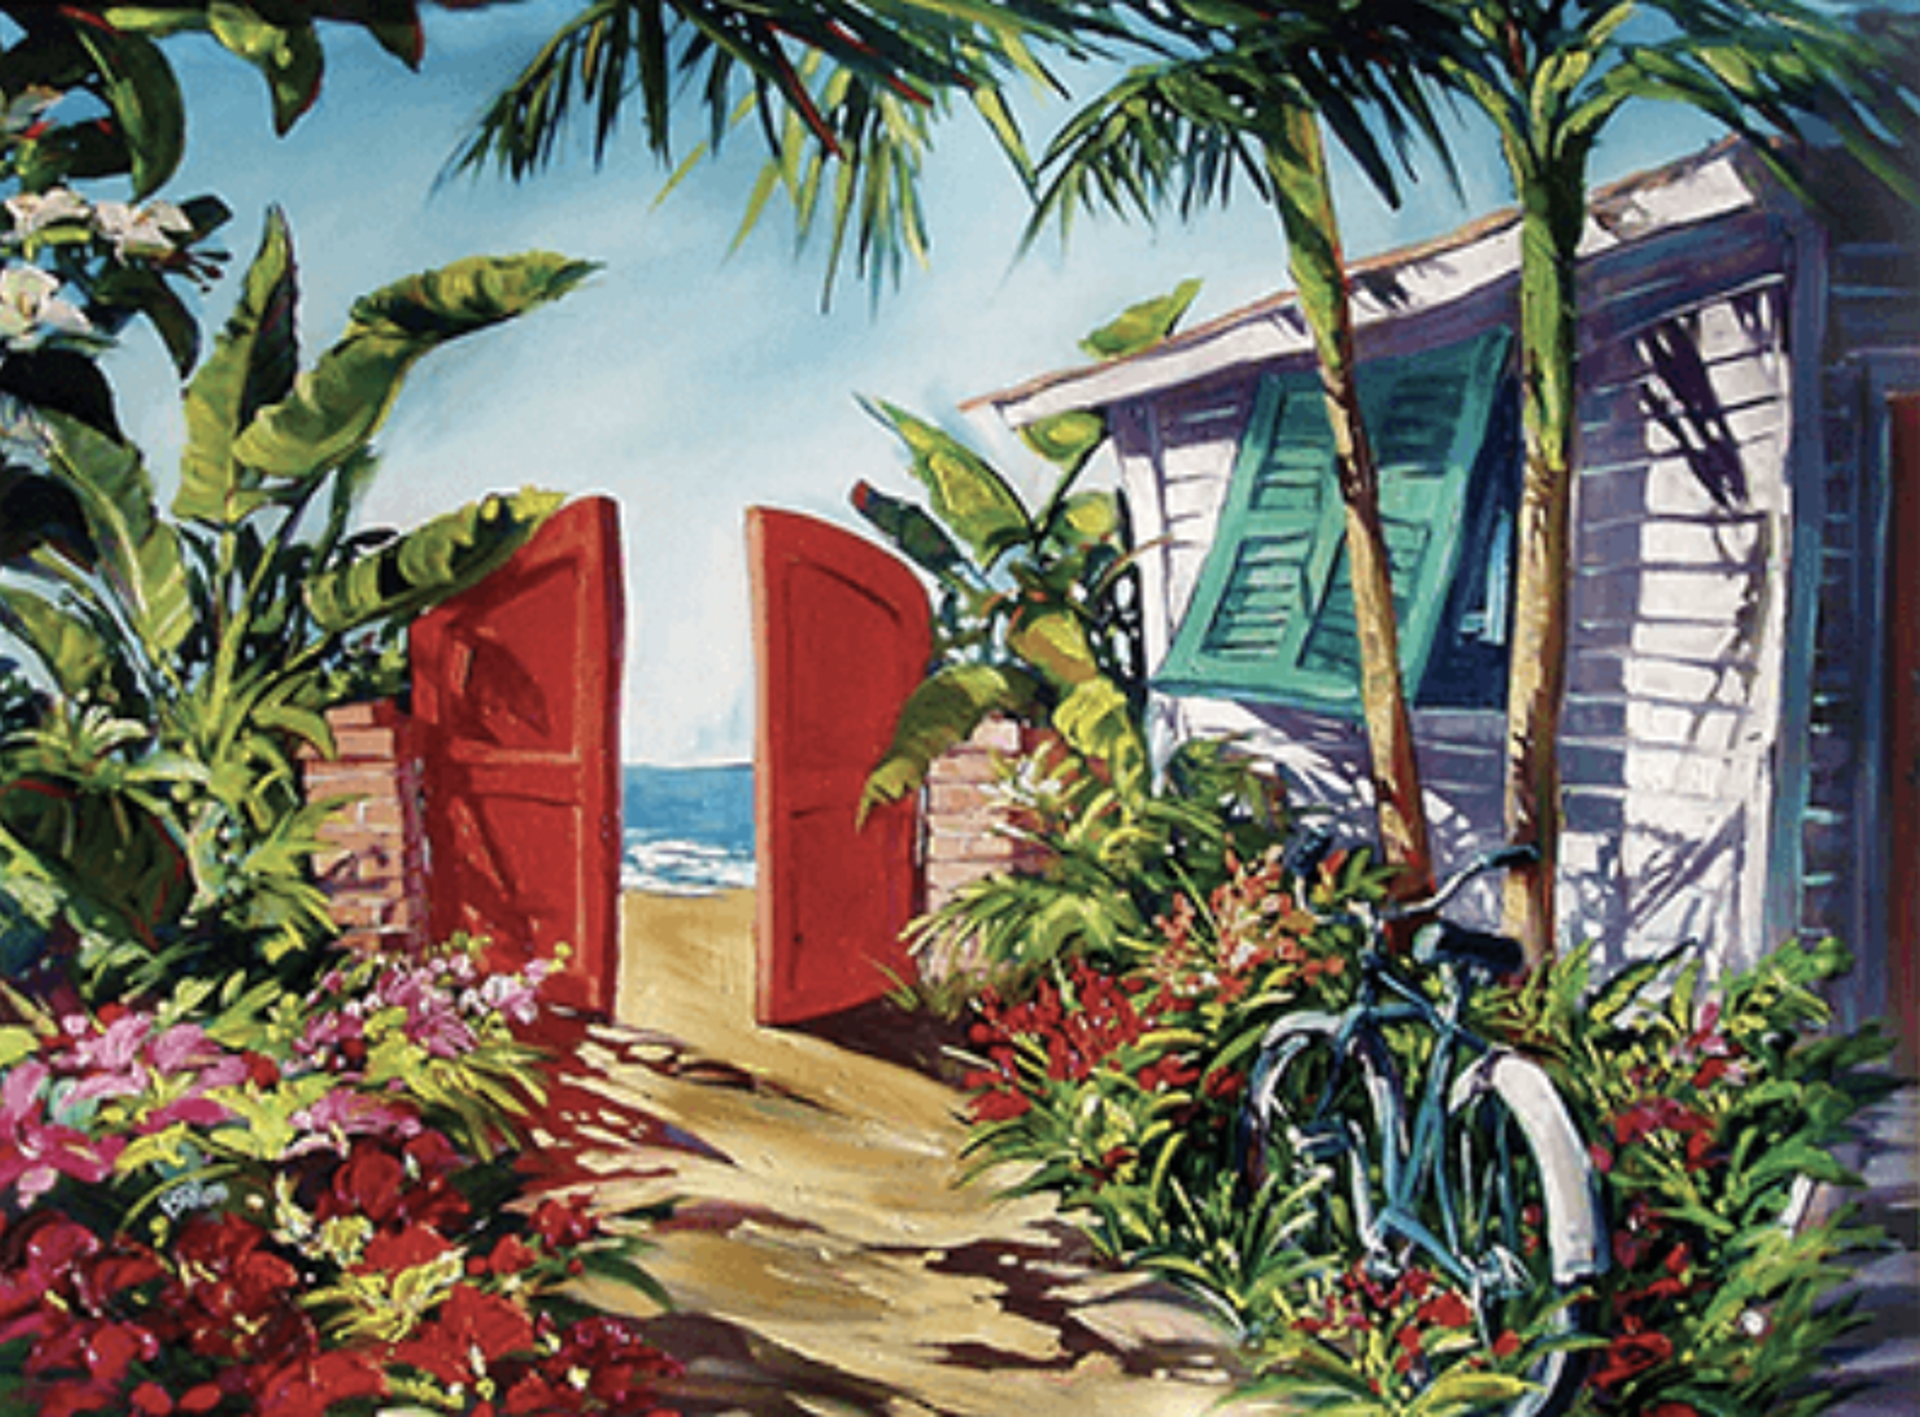 Cozy Beach (Available in 18" by 24 and 30" by 40") by Steve Barton